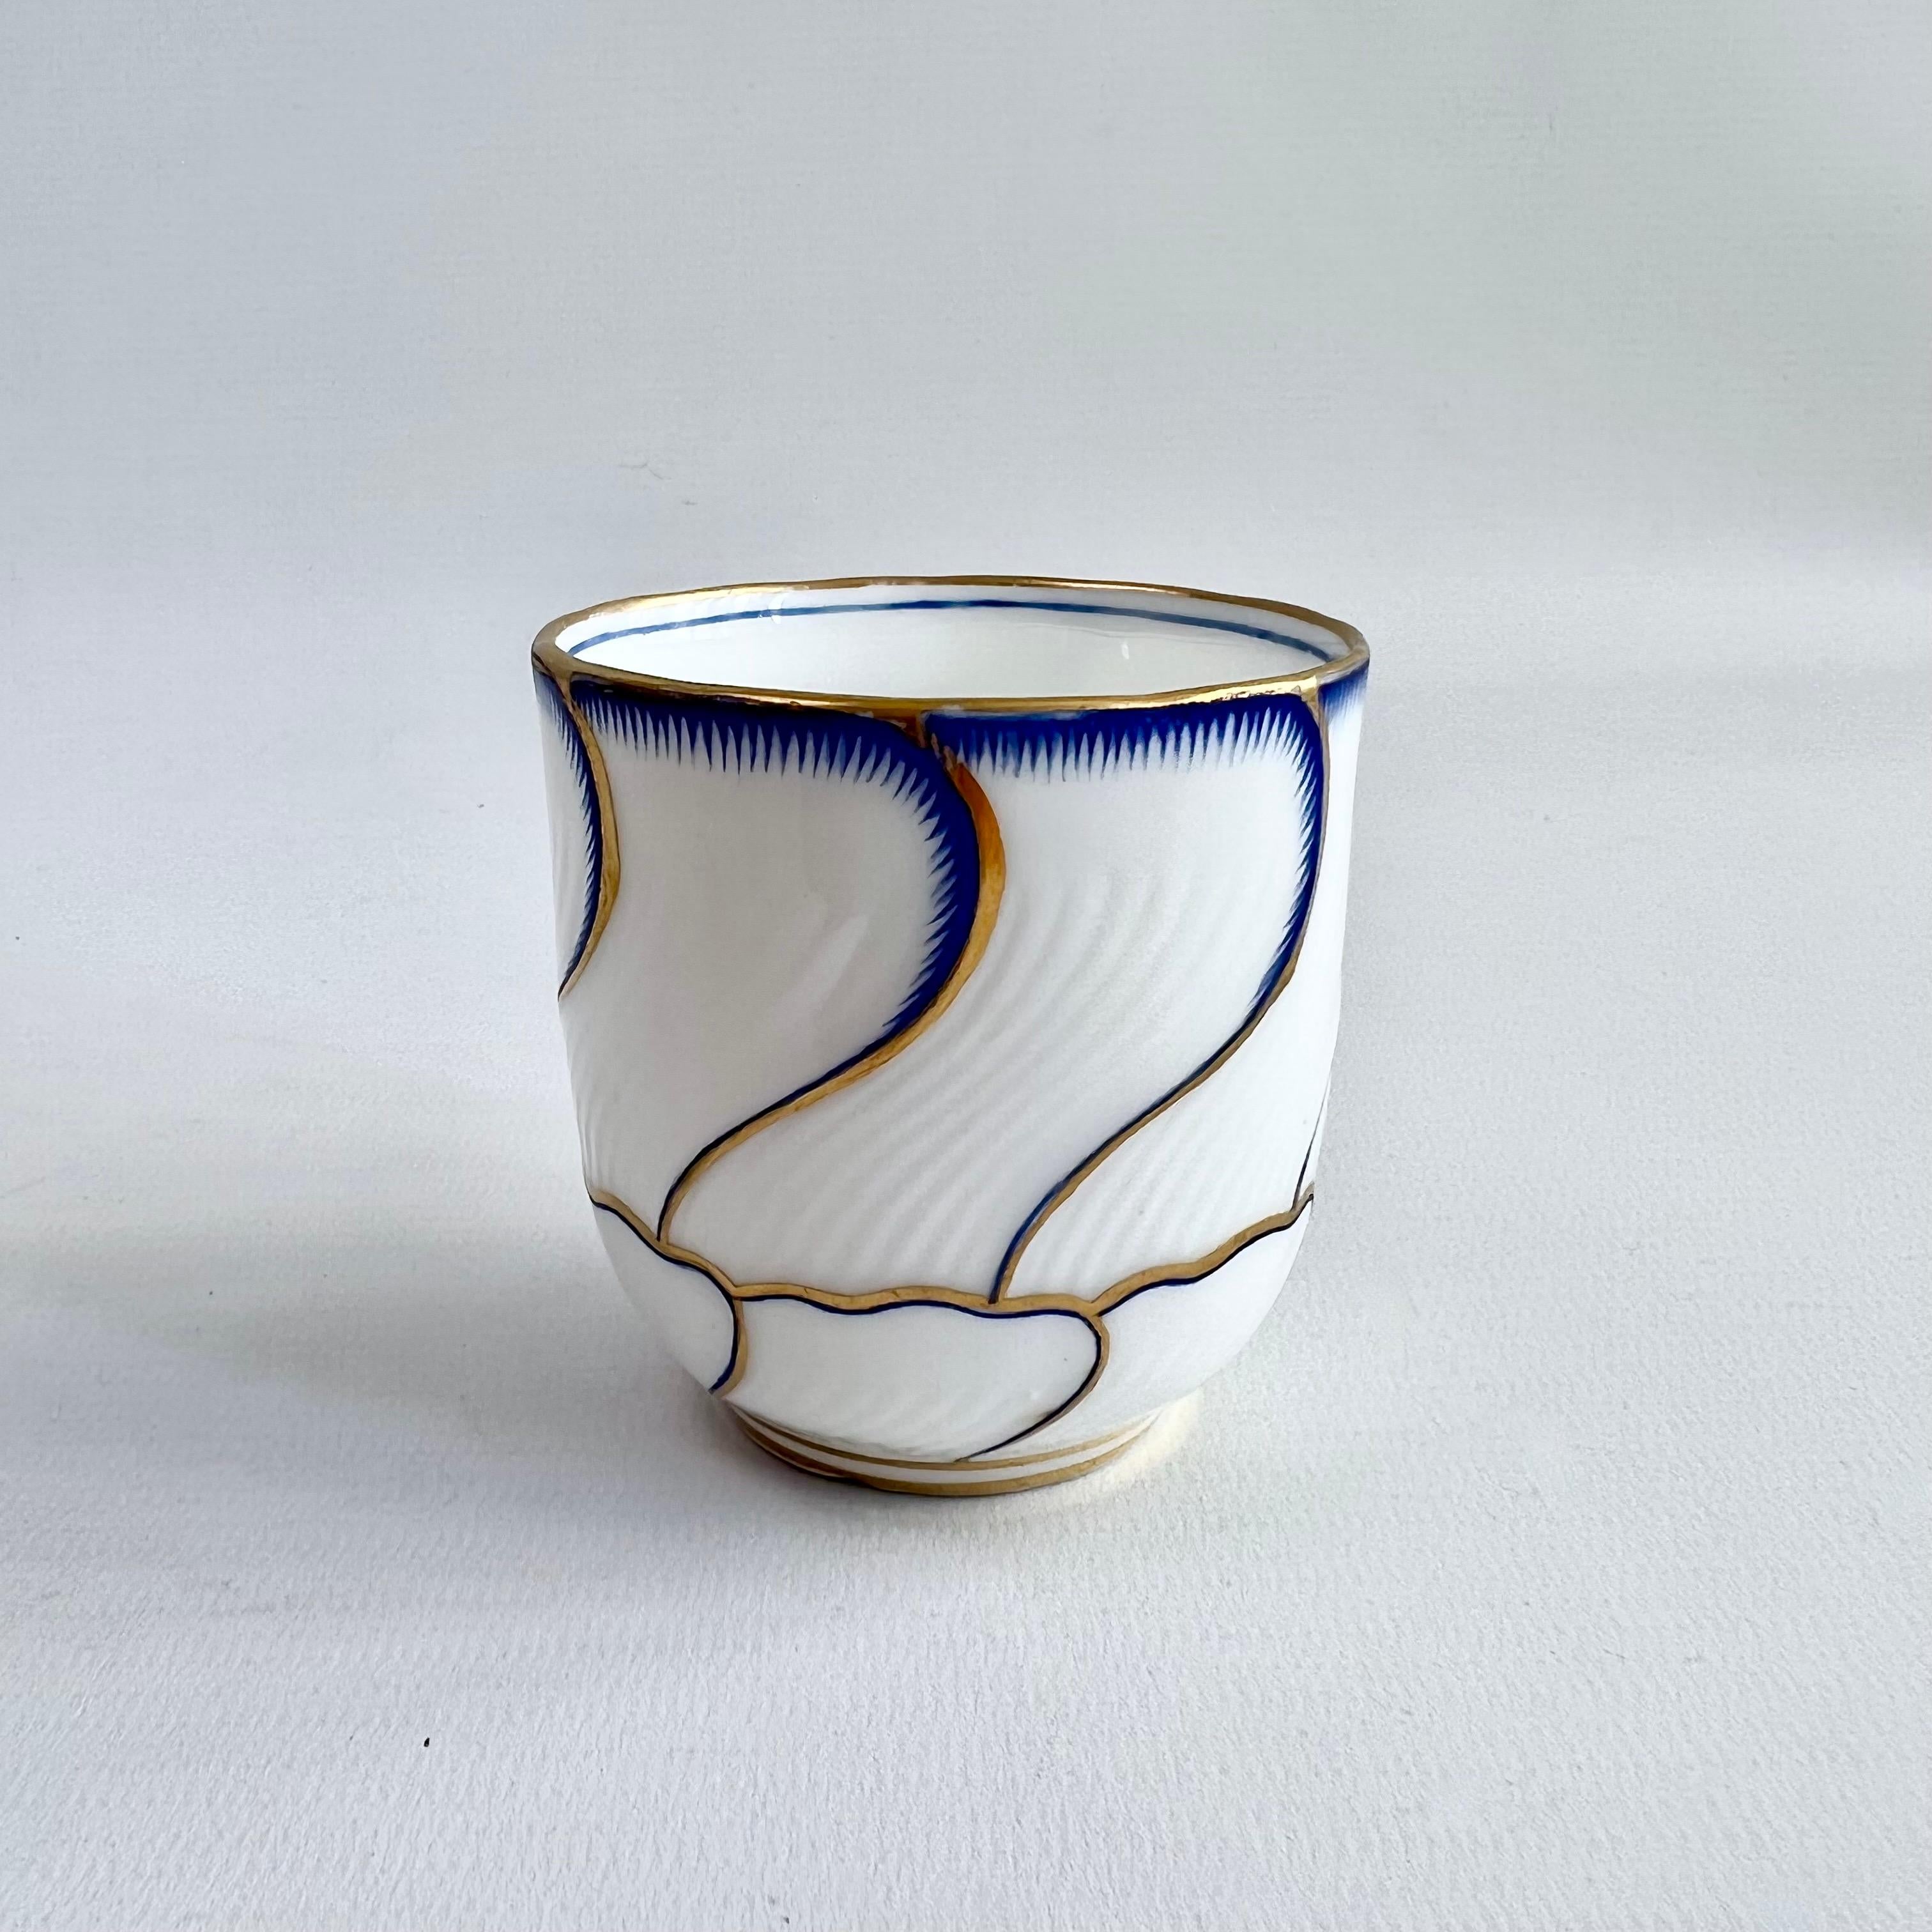 English Minton Orphaned Coffee Cup, Spiral Fluted with Blue and Gilt, Victorian ca 1881